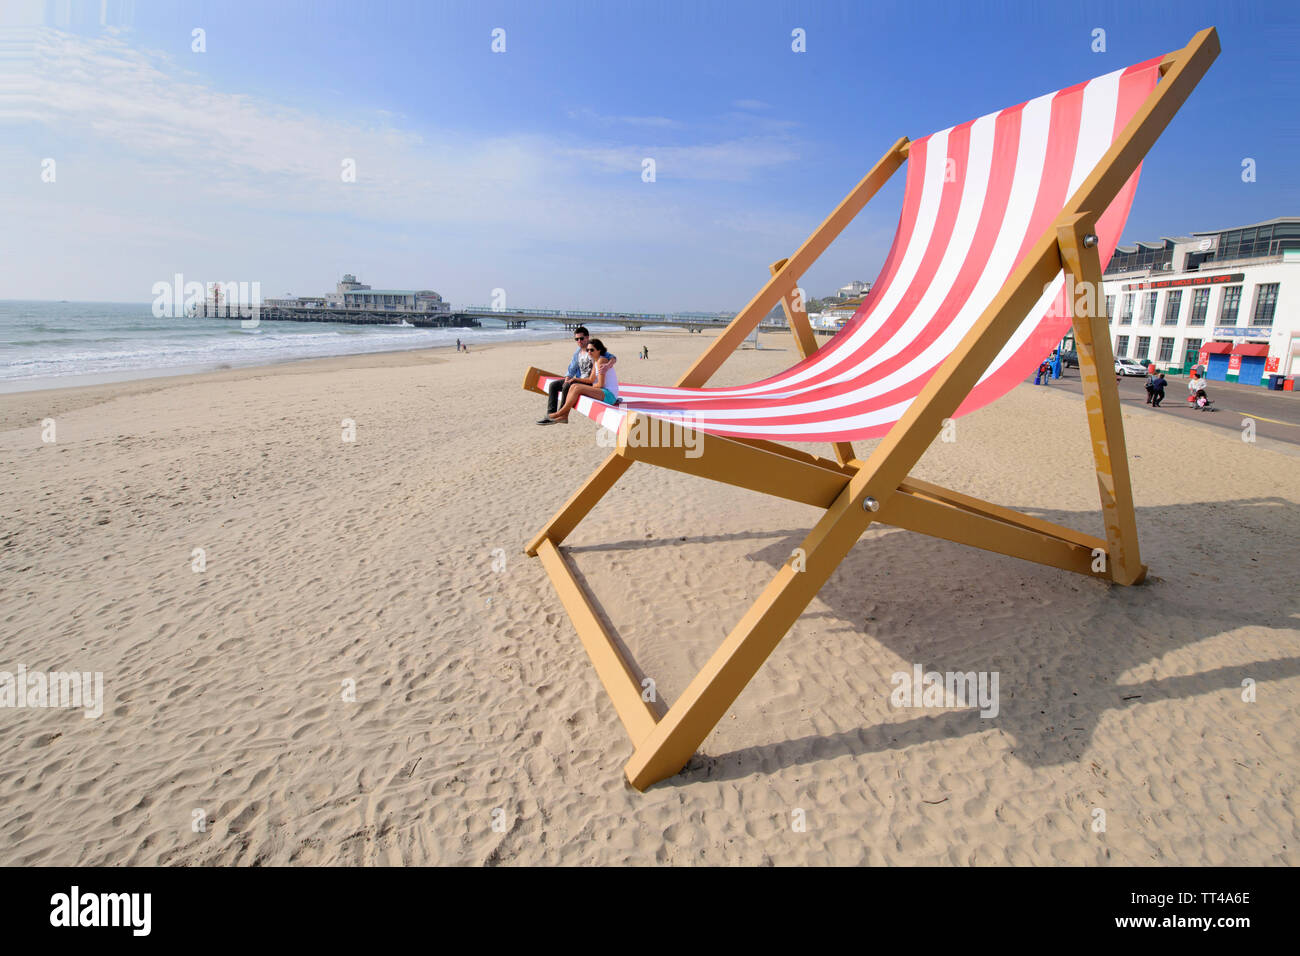 The World S Largest Deck Chair Comes To Bournemouth Beach The